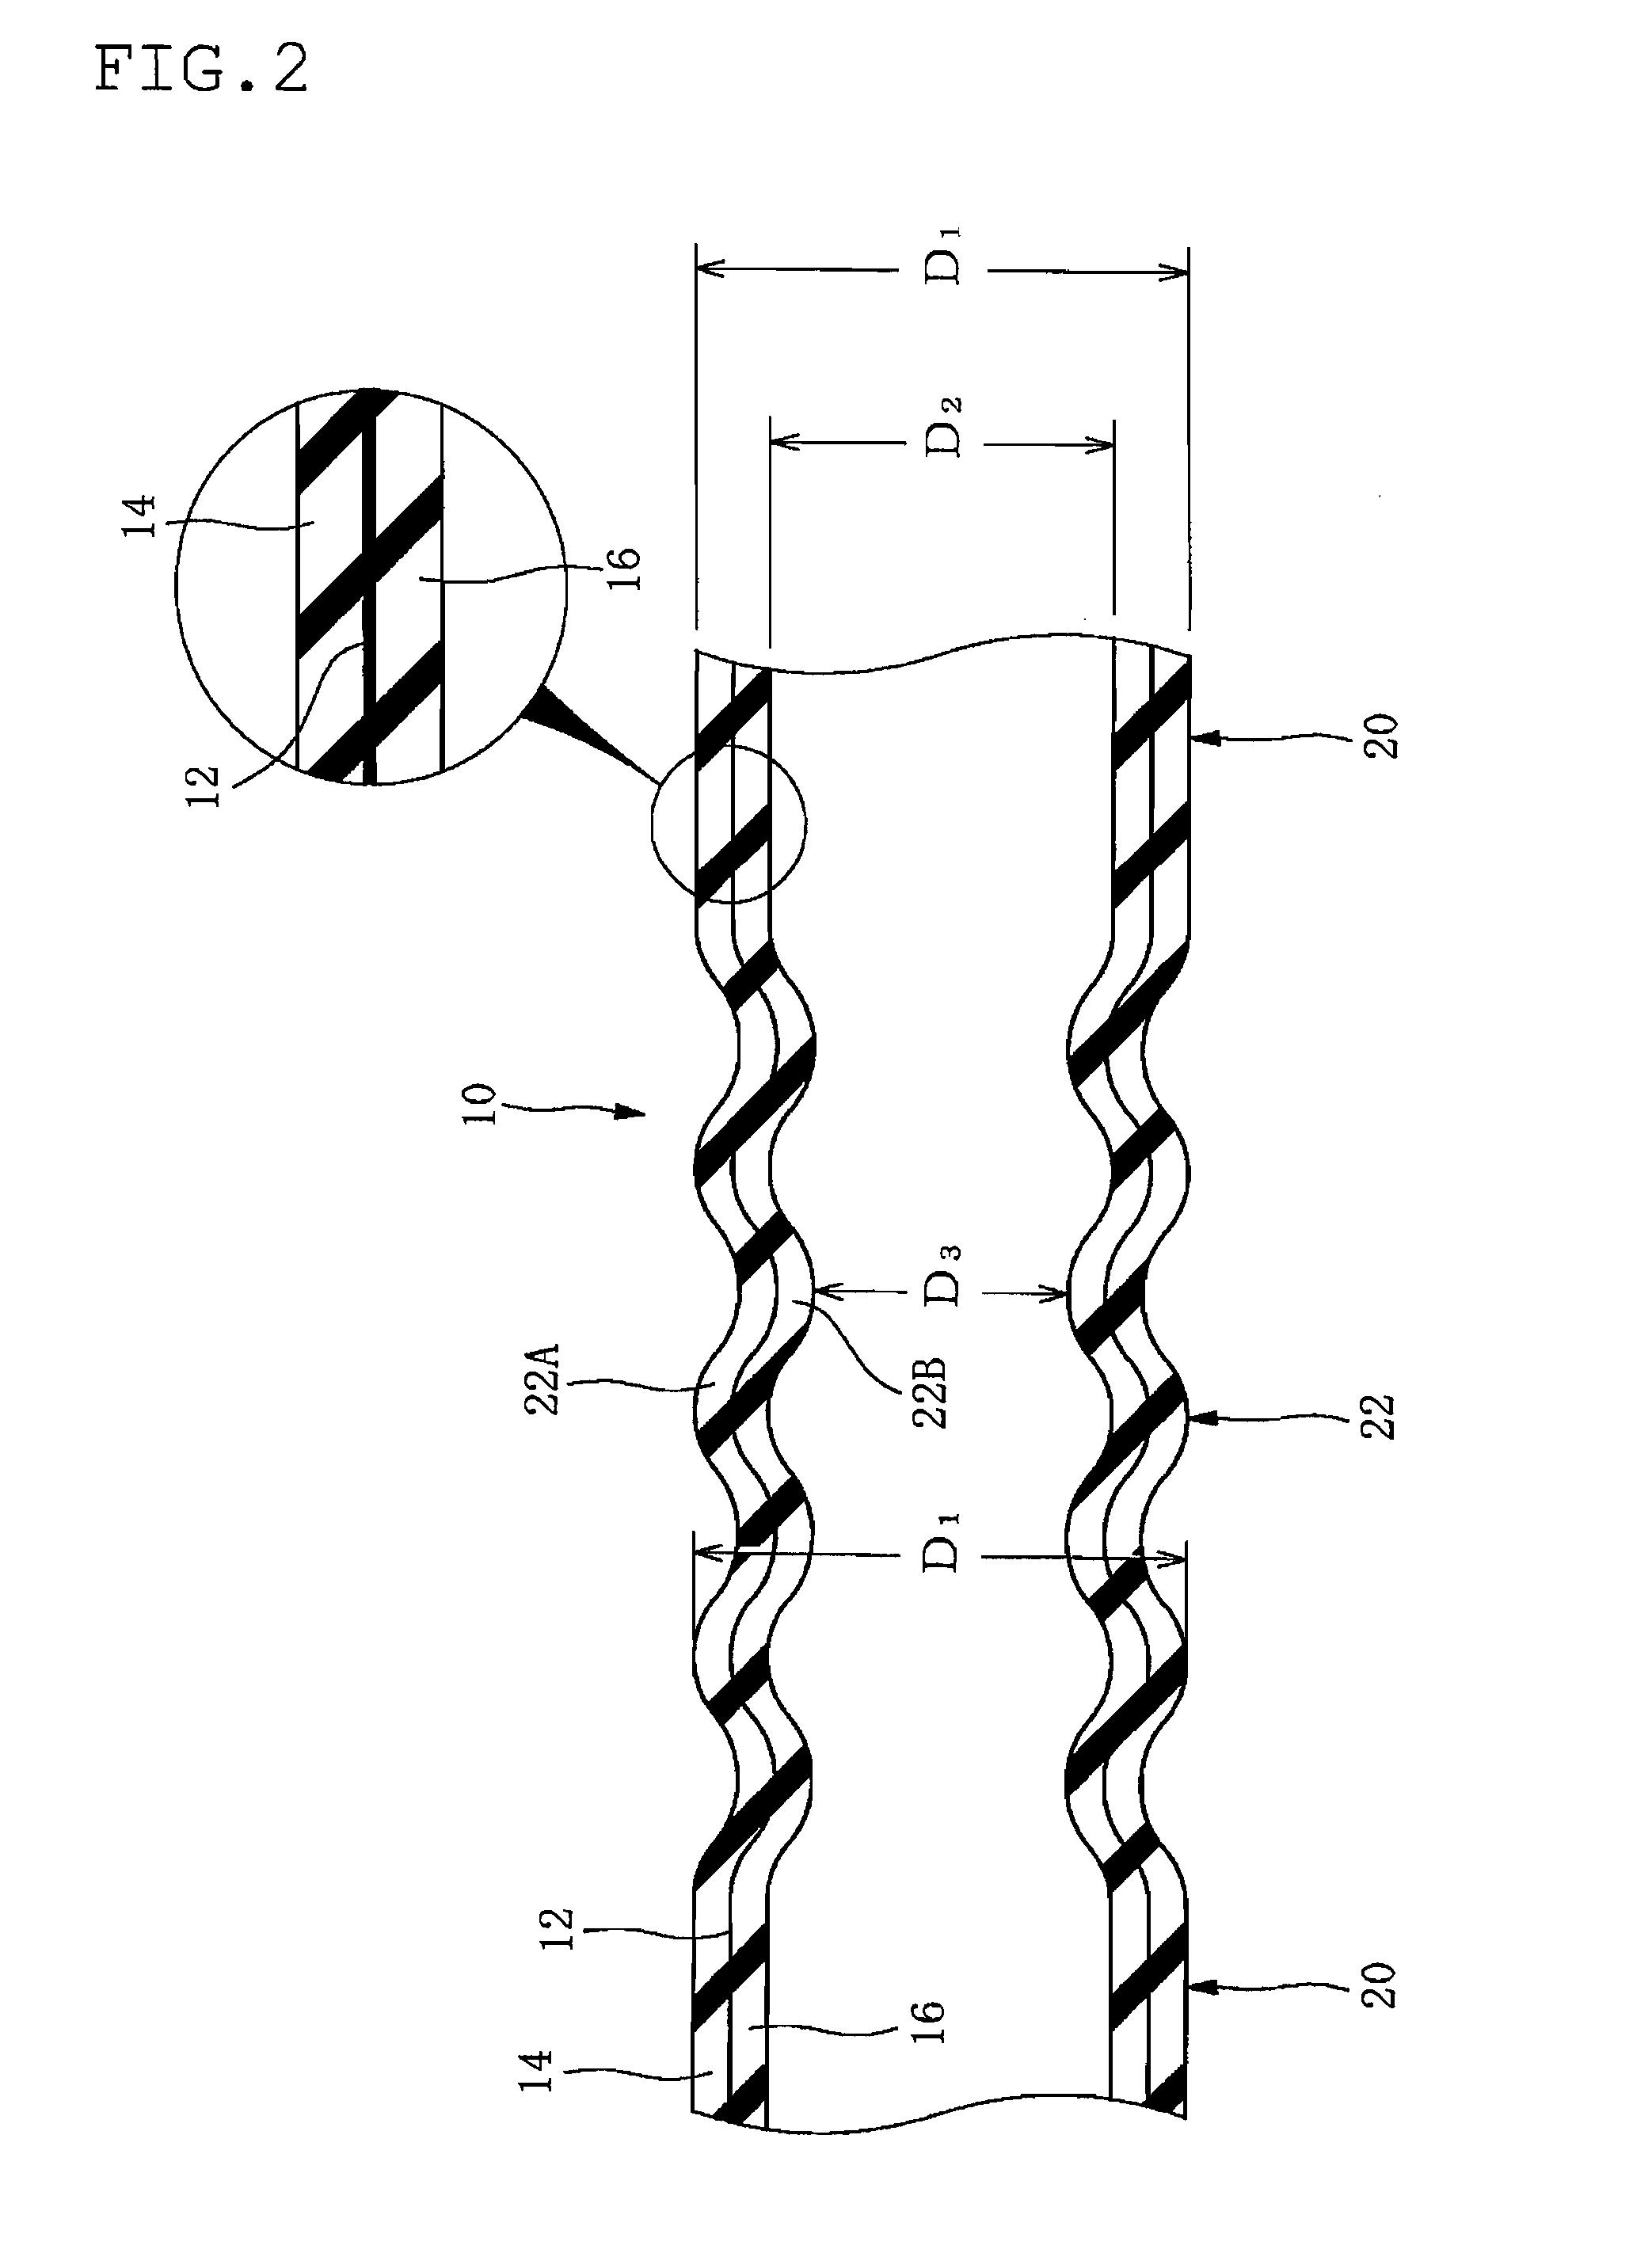 Corrugated Hose for Transporting Fluid and Method for Producing the Same